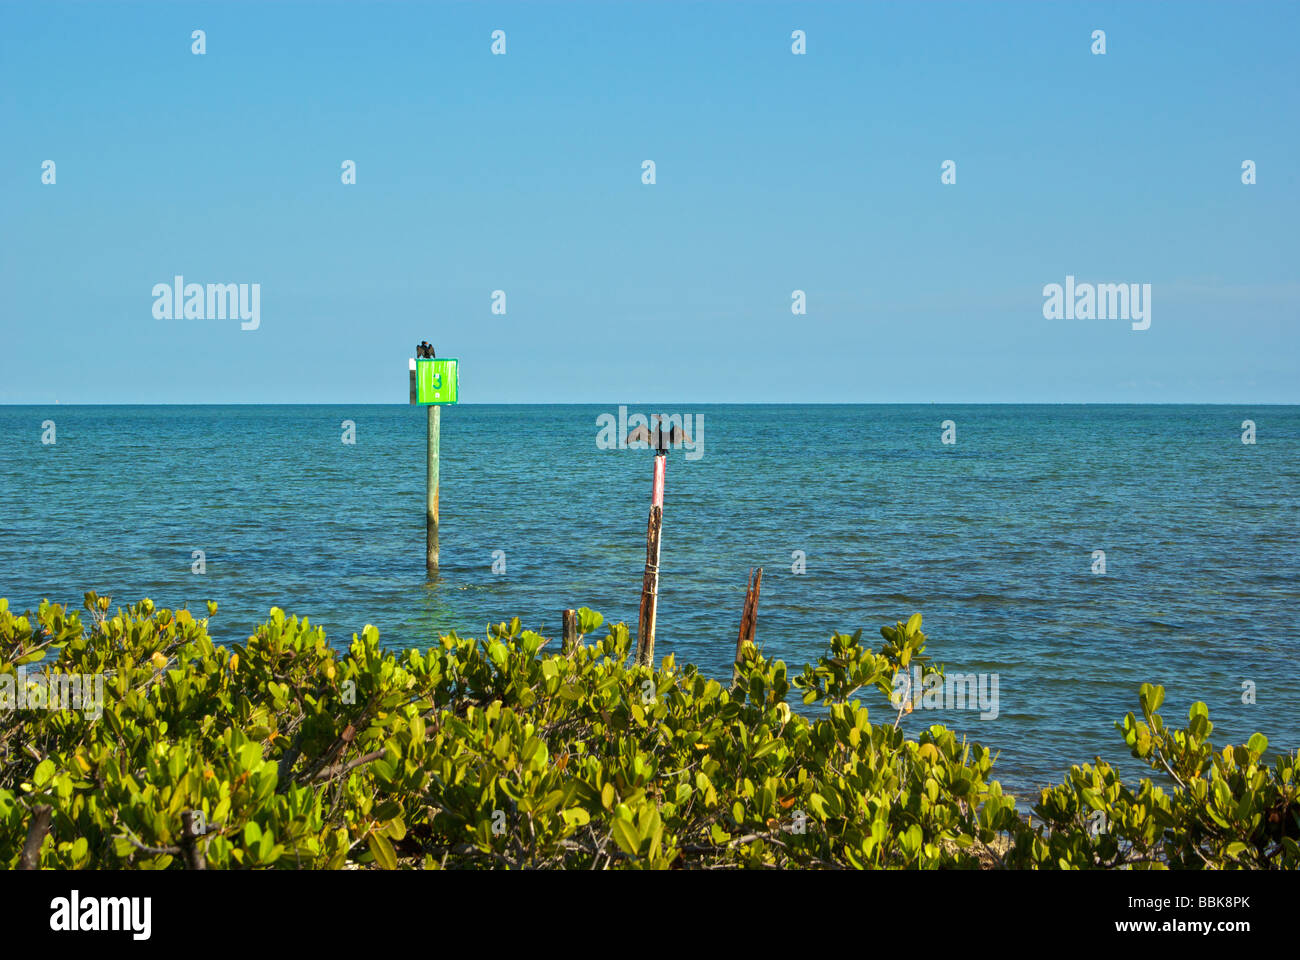 Cormorants spreading their wings to dry off on nautical navigation marker poles embedded in shallow Key Largo saltwater flats Stock Photo